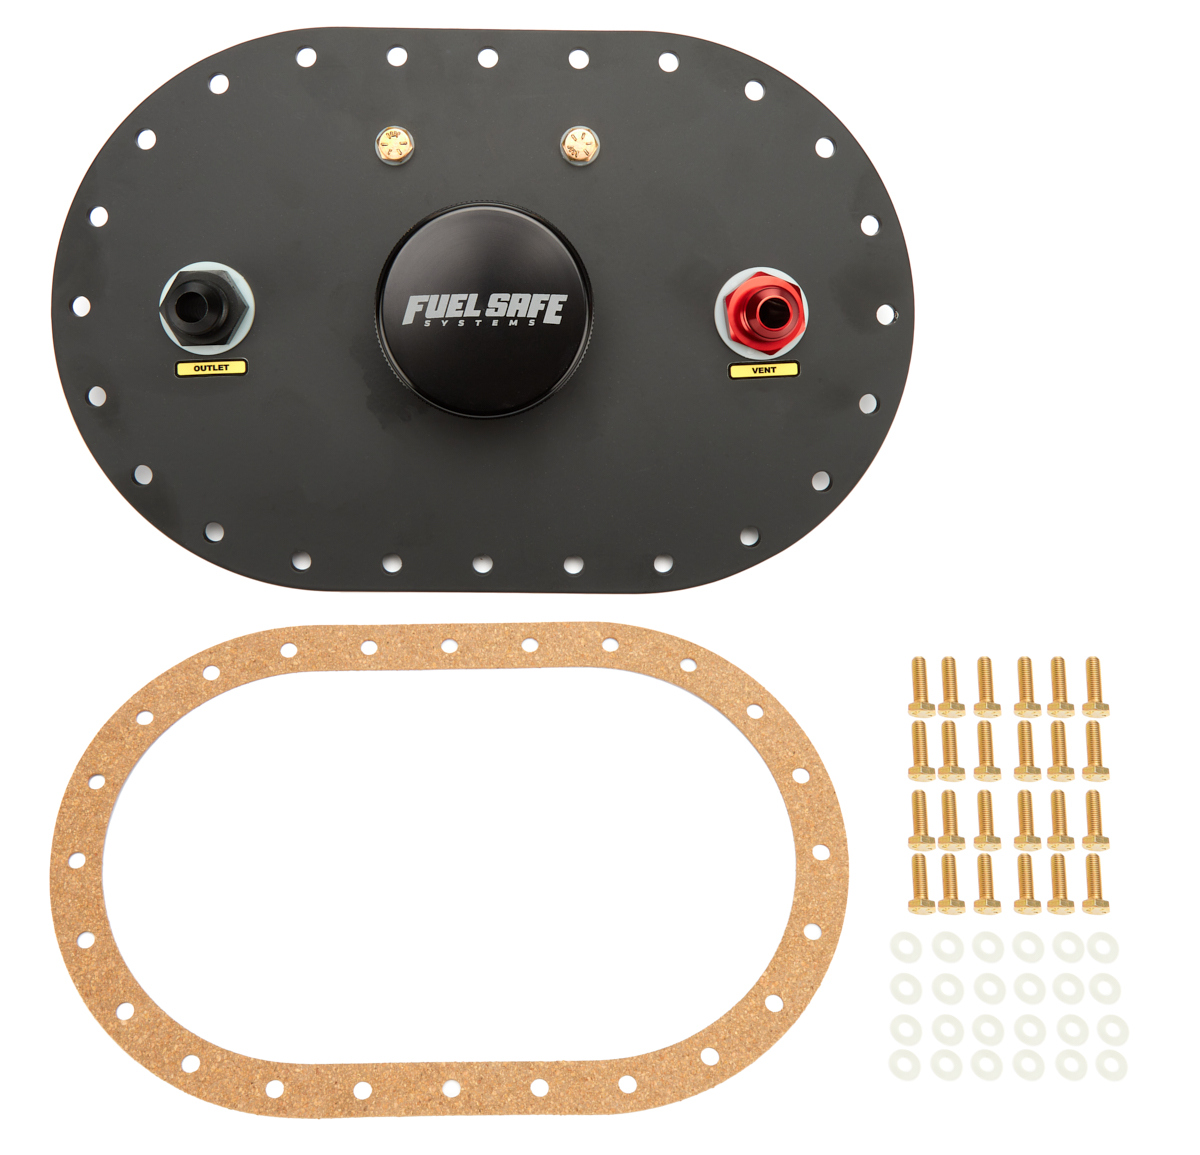 Fuel Safe SF6X10A-A Fuel Cell Filler Plate, Threaded Cap, Flat Mount, 24-Bolt Flange, 8 AN Male Outlet / Vent, Rollover Valve, Steel, Black Anodized, Kit